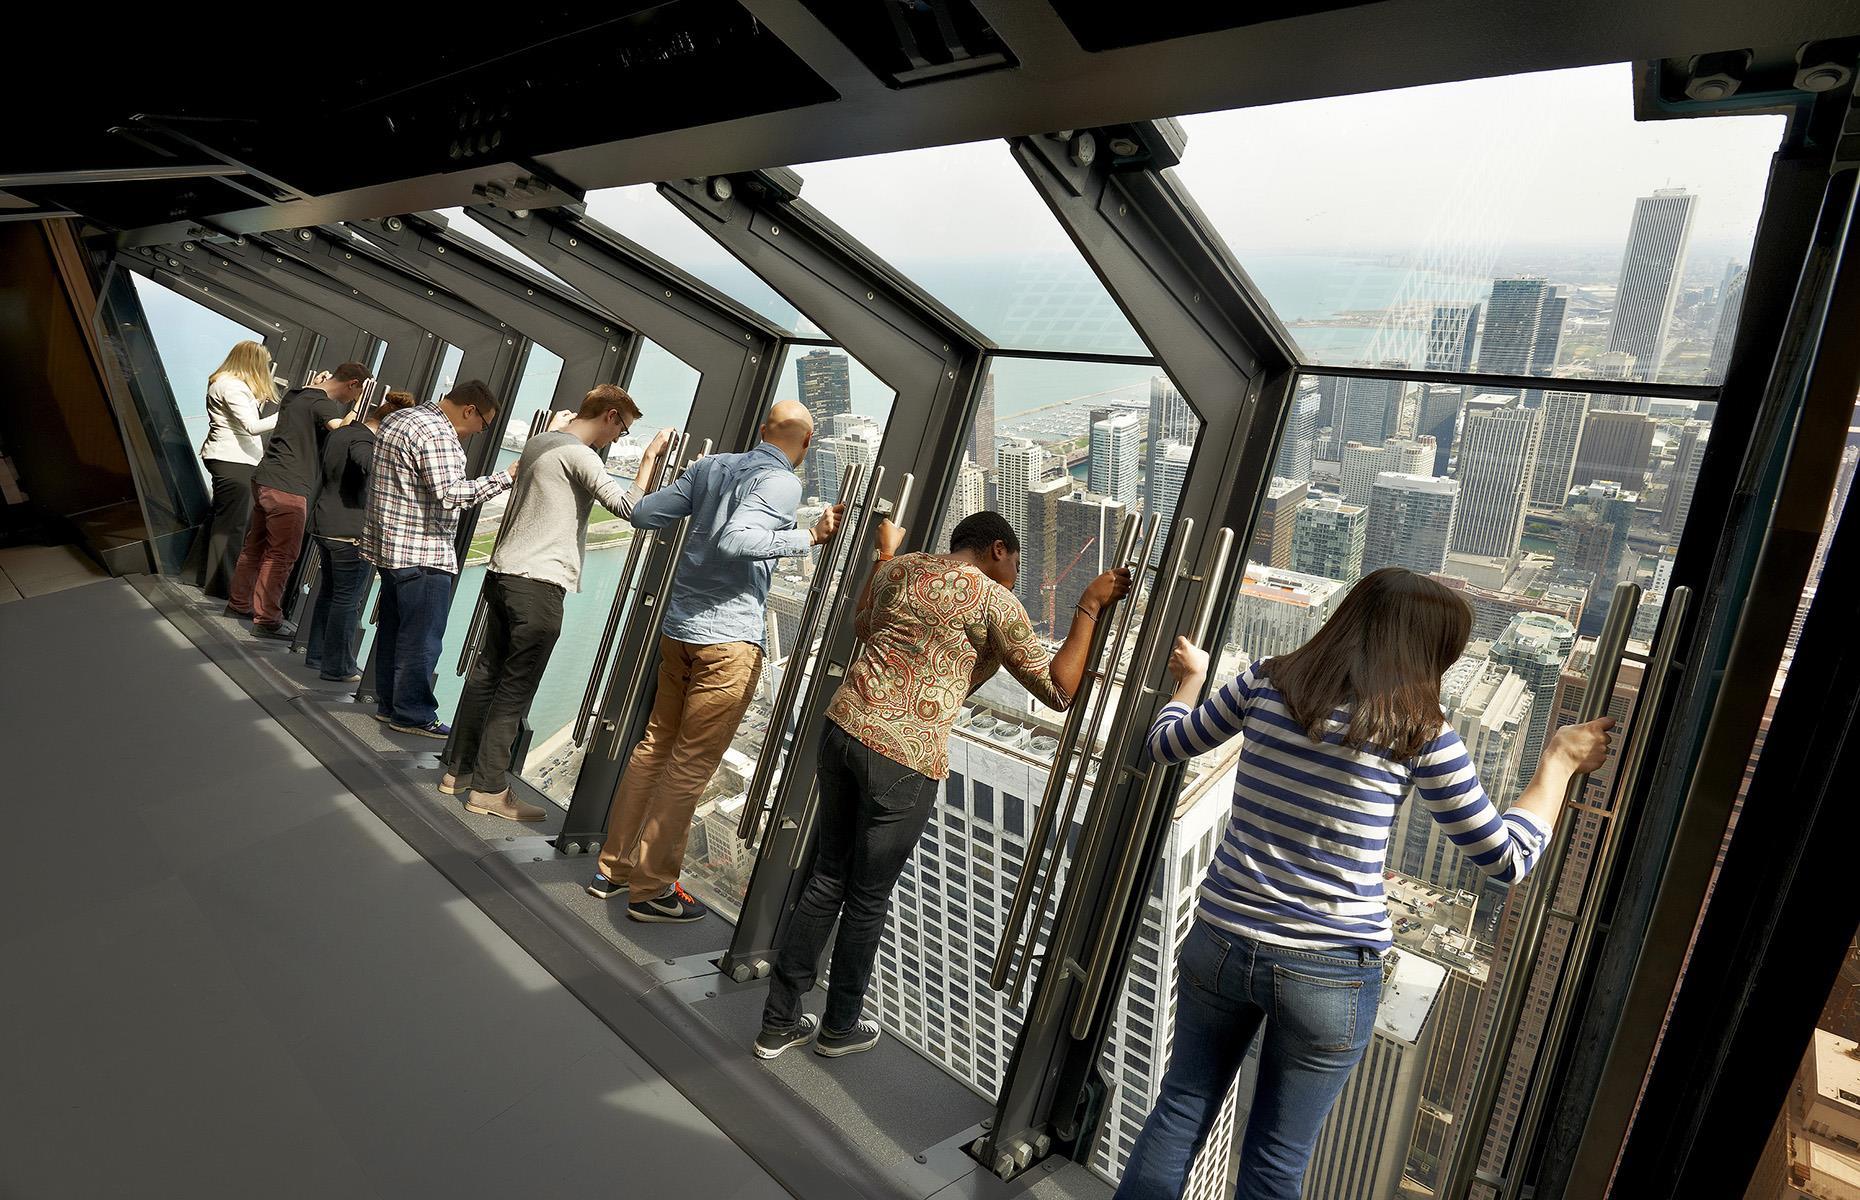 <p>The Windy City is known for its architecture and you can drink in the distinctive skyline from the 94th floor of 875 North Michigan Avenue (formerly the John Hancock Building). The skyscraper's <a href="https://360chicago.com">observation deck</a> enjoys a sought-after location around 1,000 feet (305m) above Chicago's Magnificent Mile, with uninterrupted vistas over the city and to Lake Michigan. The bravest can take a ride on TILT – a hair-raising attraction that sees visitors tilted outward on a moving glass platform, awarding them downward-facing views of the city below. </p>